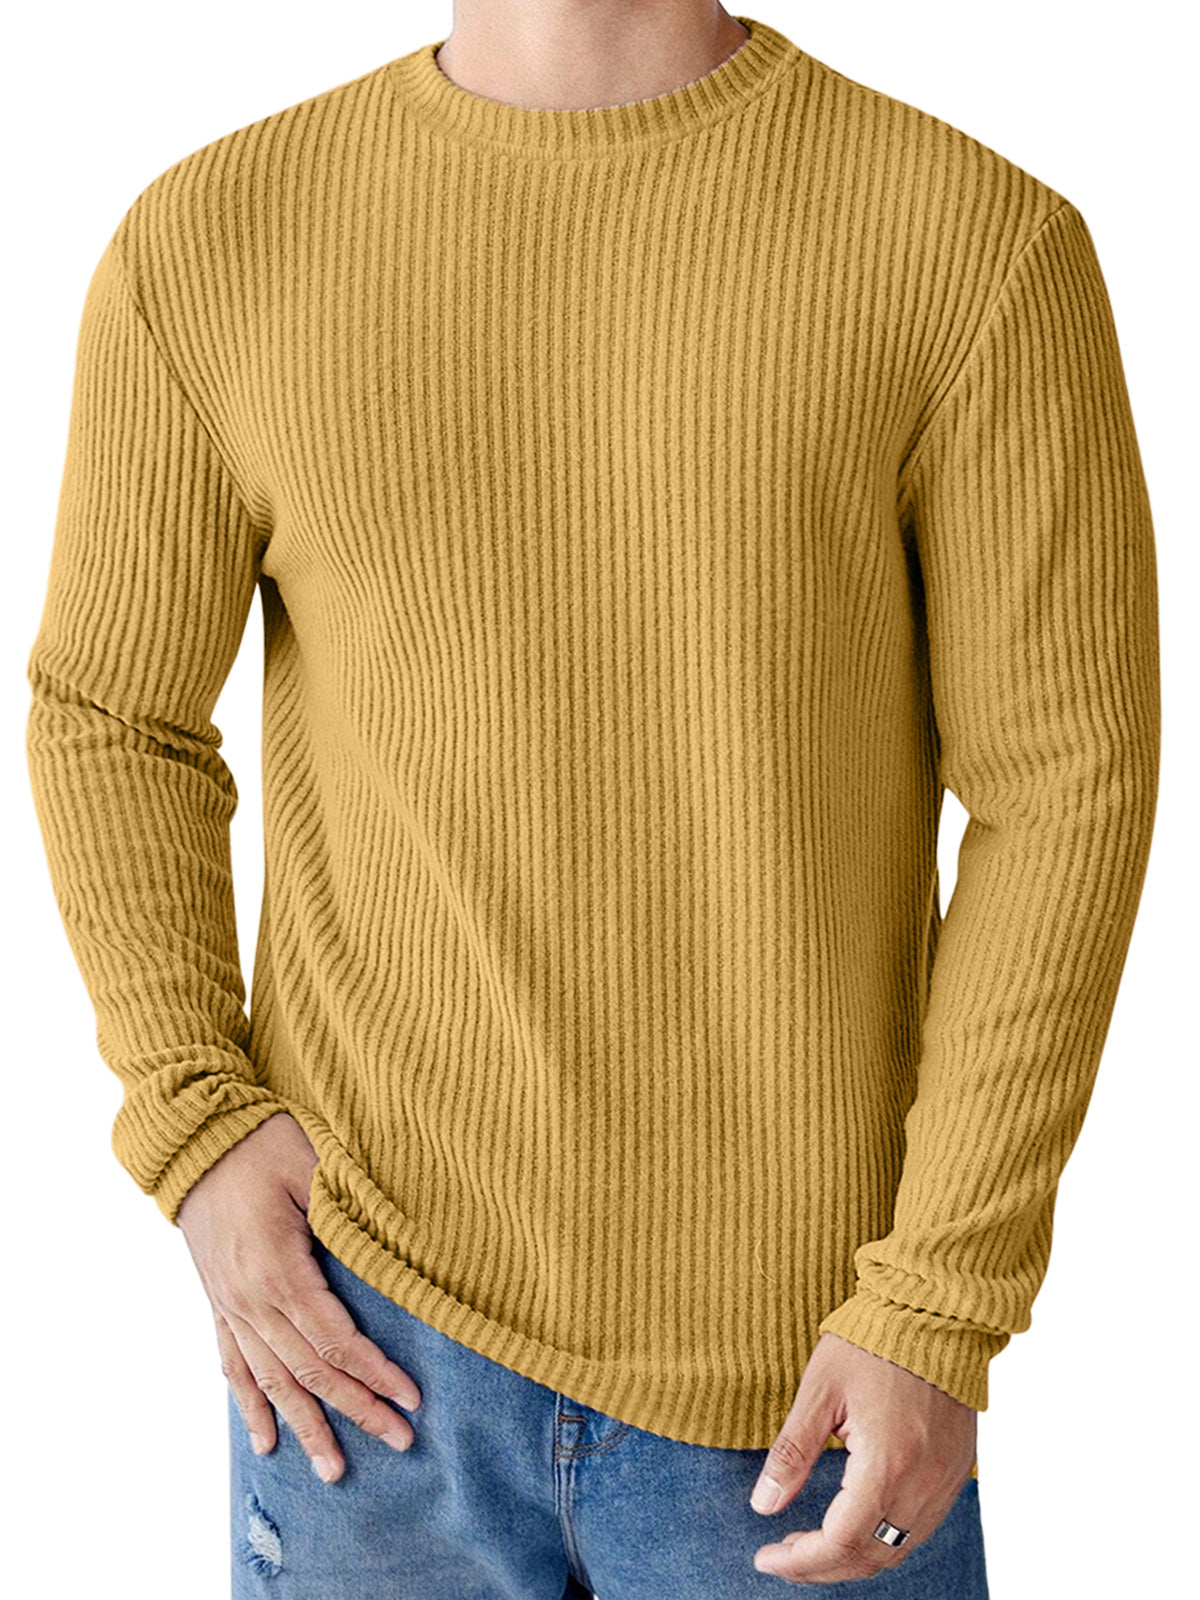 Men's Casual Round Neck Striped Loose Large Size Long Sleeve T-Shirt